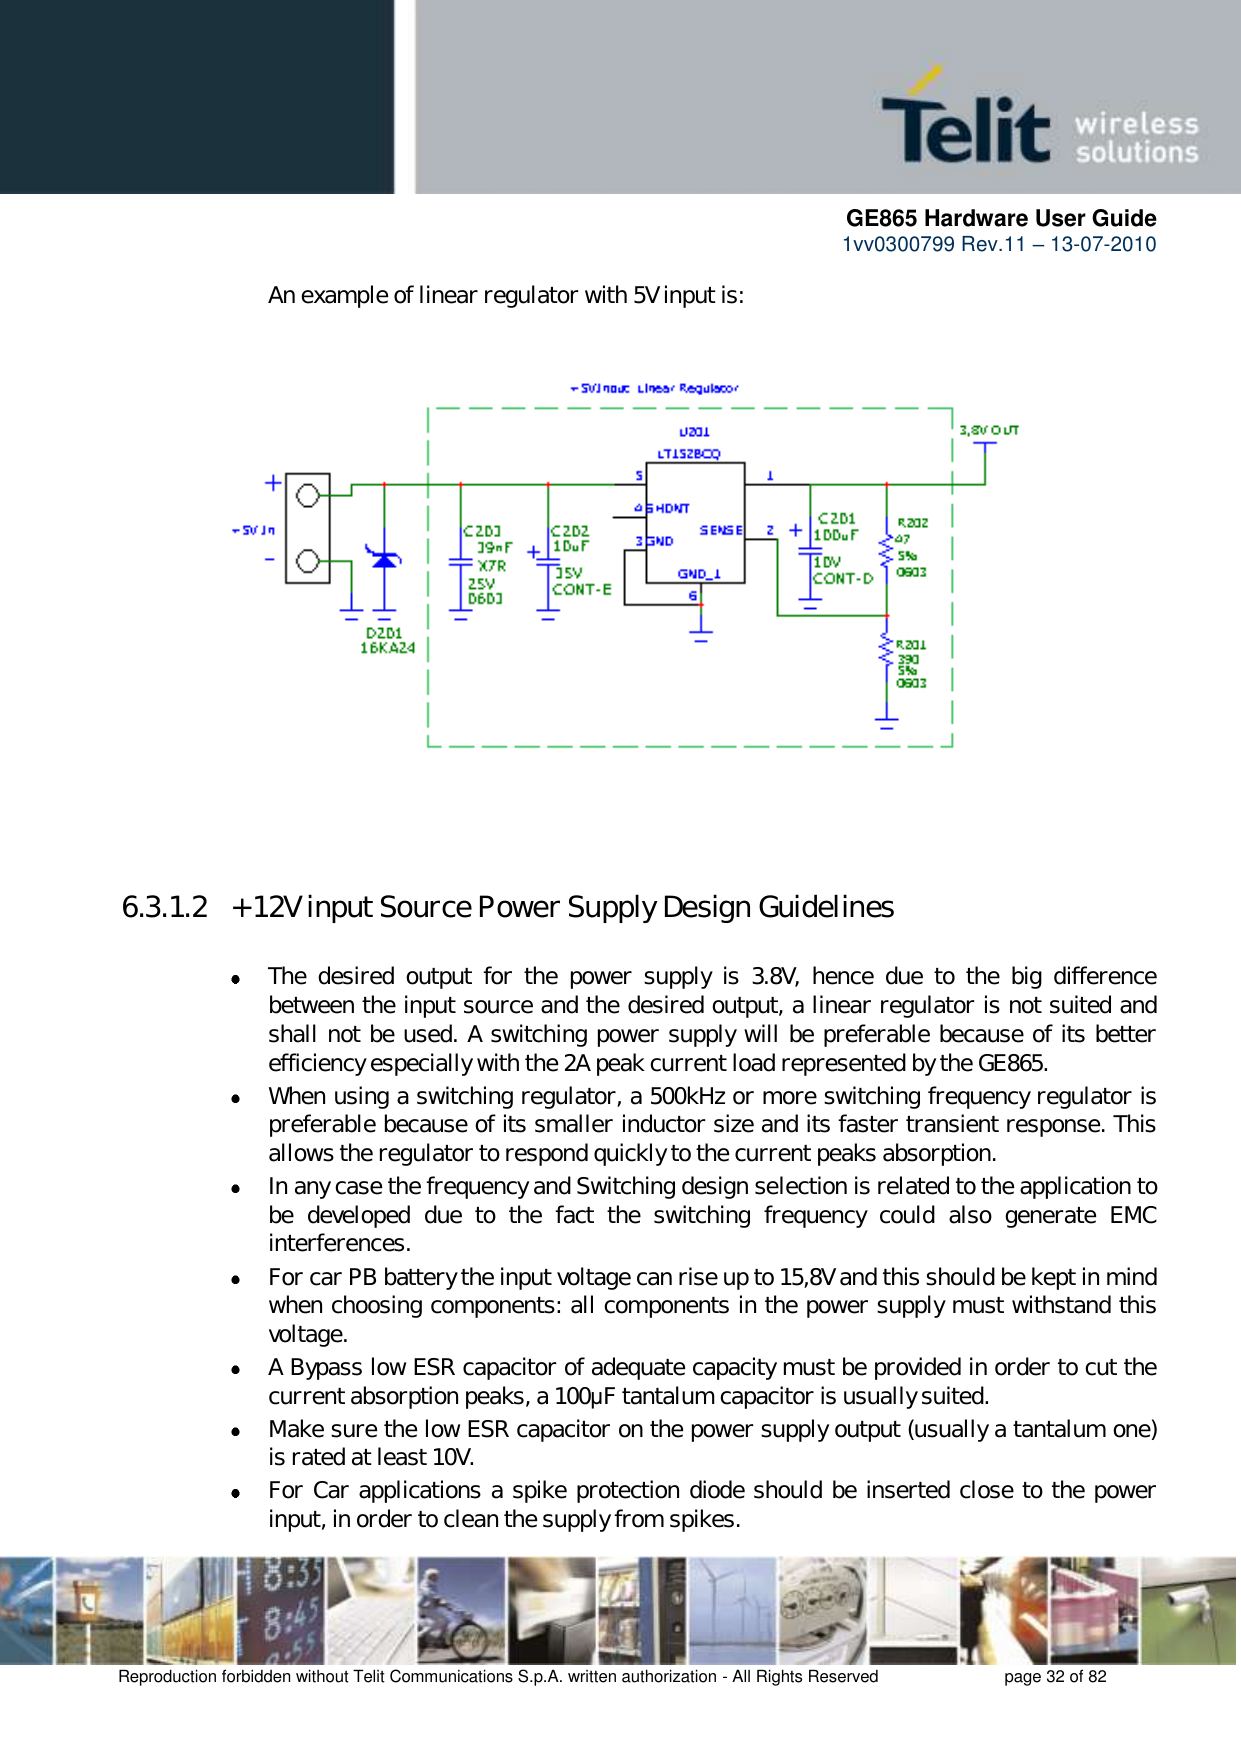      GE865 Hardware User Guide 1vv0300799 Rev.11 – 13-07-2010       Reproduction forbidden without Telit Communications S.p.A. written authorization - All Rights Reserved    page 32 of 82  An example of linear regulator with 5V input is:                     6.3.1.2  + 12V input Source Power Supply Design Guidelines   The  desired  output  for  the  power  supply  is  3.8V,  hence  due  to  the  big  difference between the input source and the desired output, a linear regulator is not suited and shall not be used. A switching power supply will be preferable because of its better efficiency especially with the 2A peak current load represented by the GE865.  When using a switching regulator, a 500kHz or more switching frequency regulator is preferable because of its smaller inductor size and its faster transient response. This allows the regulator to respond quickly to the current peaks absorption.   In any case the frequency and Switching design selection is related to the application to be  developed  due  to  the  fact  the  switching  frequency  could  also  generate  EMC interferences.  For car PB battery the input voltage can rise up to 15,8V and this should be kept in mind when choosing components: all components in the power supply must withstand this voltage.  A Bypass low ESR capacitor of adequate capacity must be provided in order to cut the current absorption peaks, a 100μF tantalum capacitor is usually suited.  Make sure the low ESR capacitor on the power supply output (usually a tantalum one) is rated at least 10V.  For Car applications a spike protection diode should be inserted close to the power input, in order to clean the supply from spikes.  